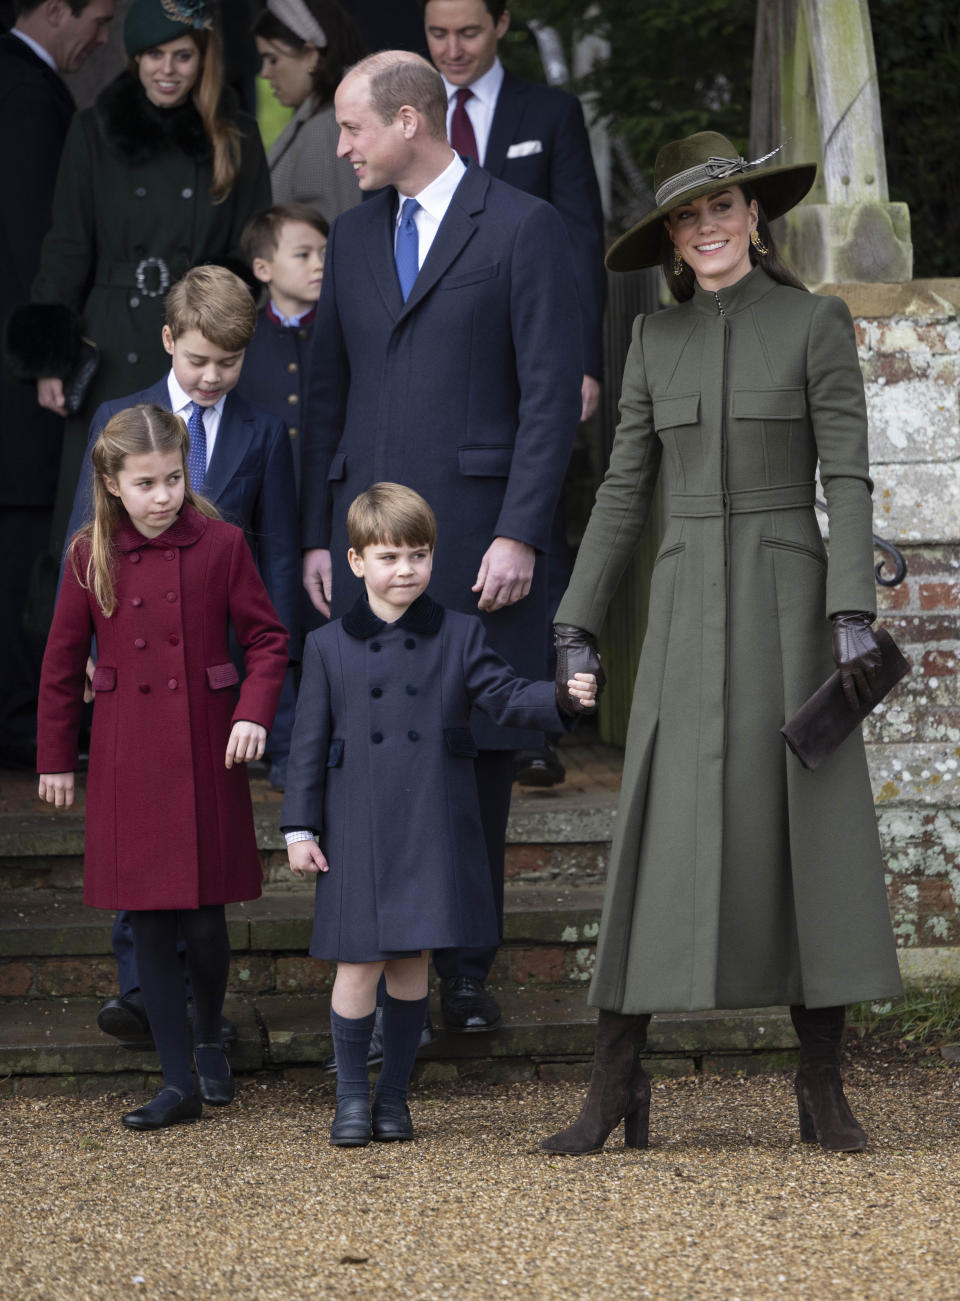 Prince William, Prince of Wales and Catherine, Princess of Wales with Prince George of Wales, Princess Charlotte of Wales and Prince Louis of Wales attend the Christmas Day service at St Mary Magdalene Church 